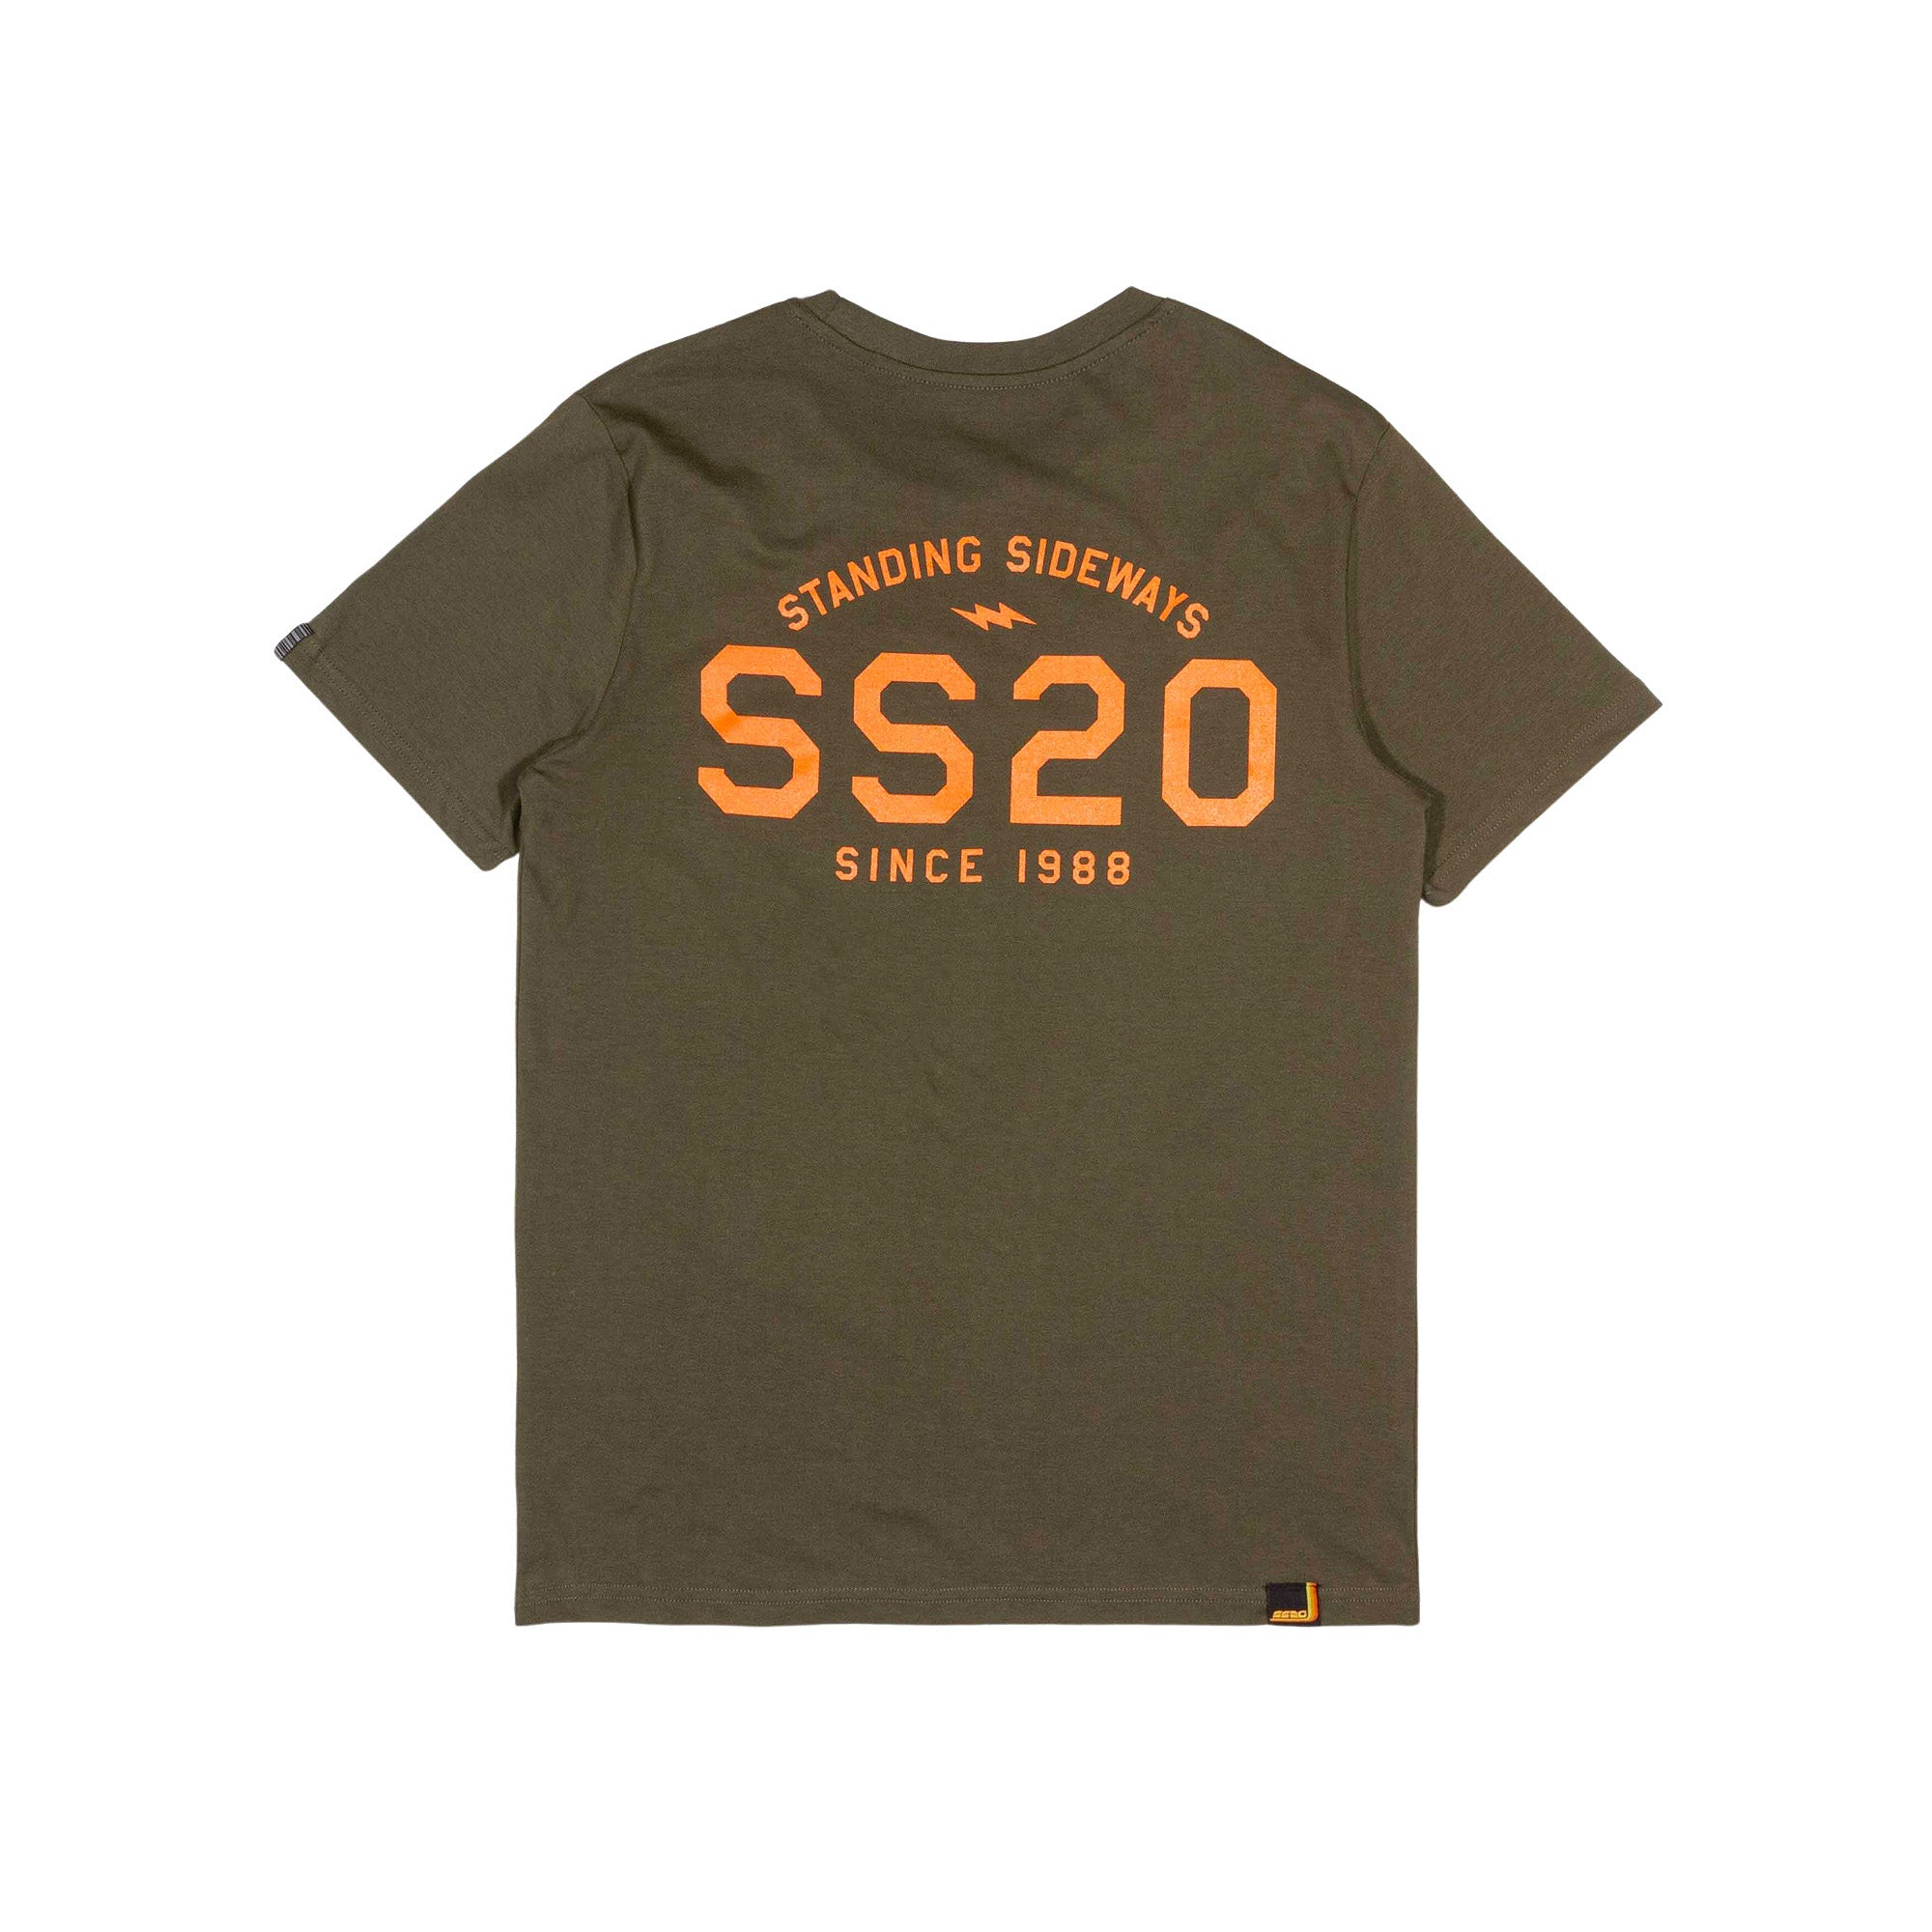 NEW RELEASES - SS20 CLOTHING 2023 – weareSS20